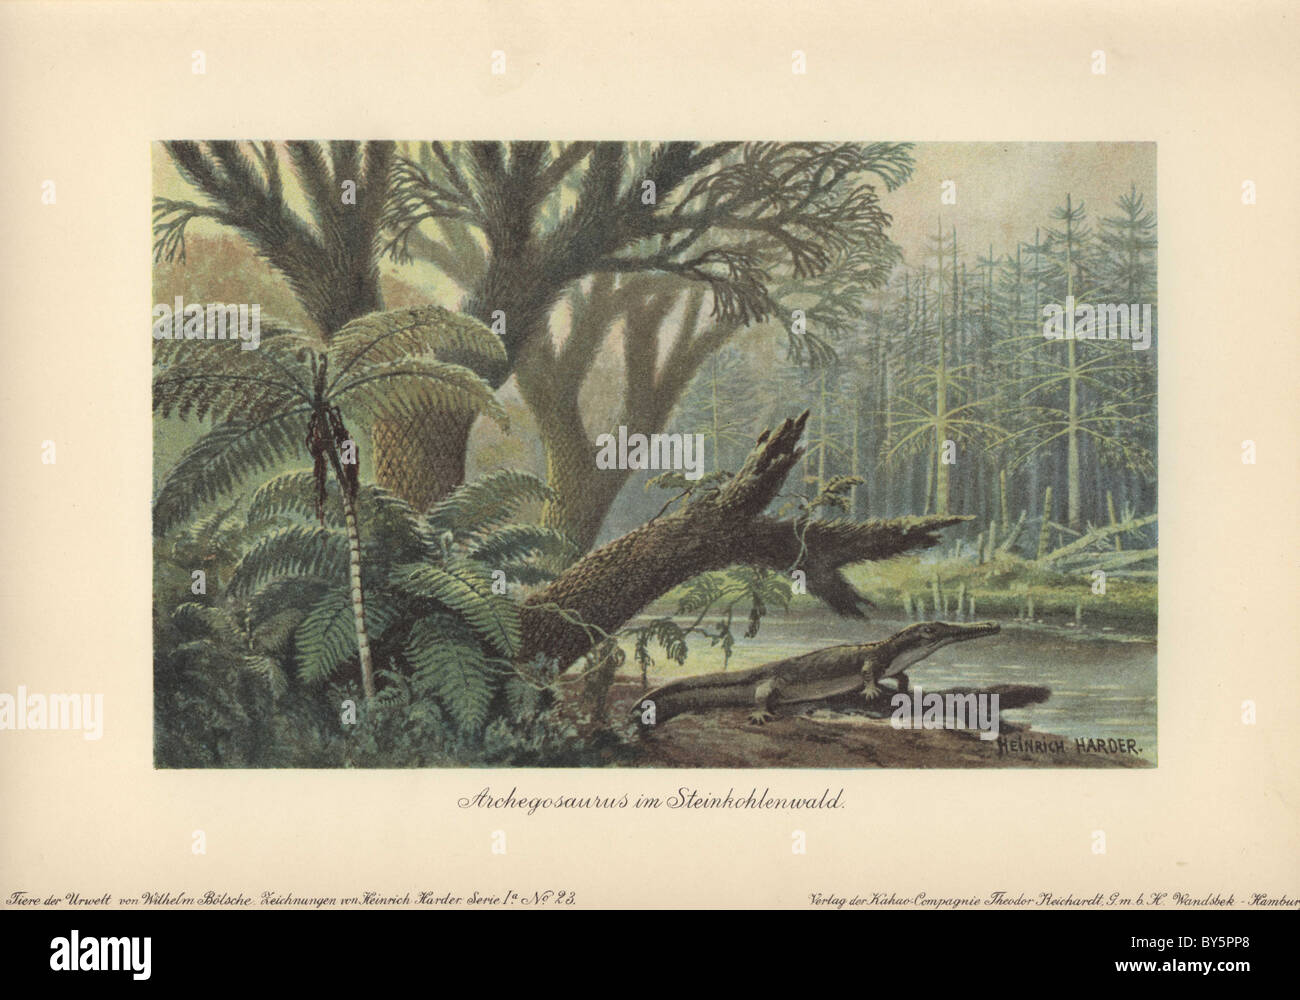 An archegosaurus by a river bank in a tropical primordial jungle of ferns and pines. Stock Photo